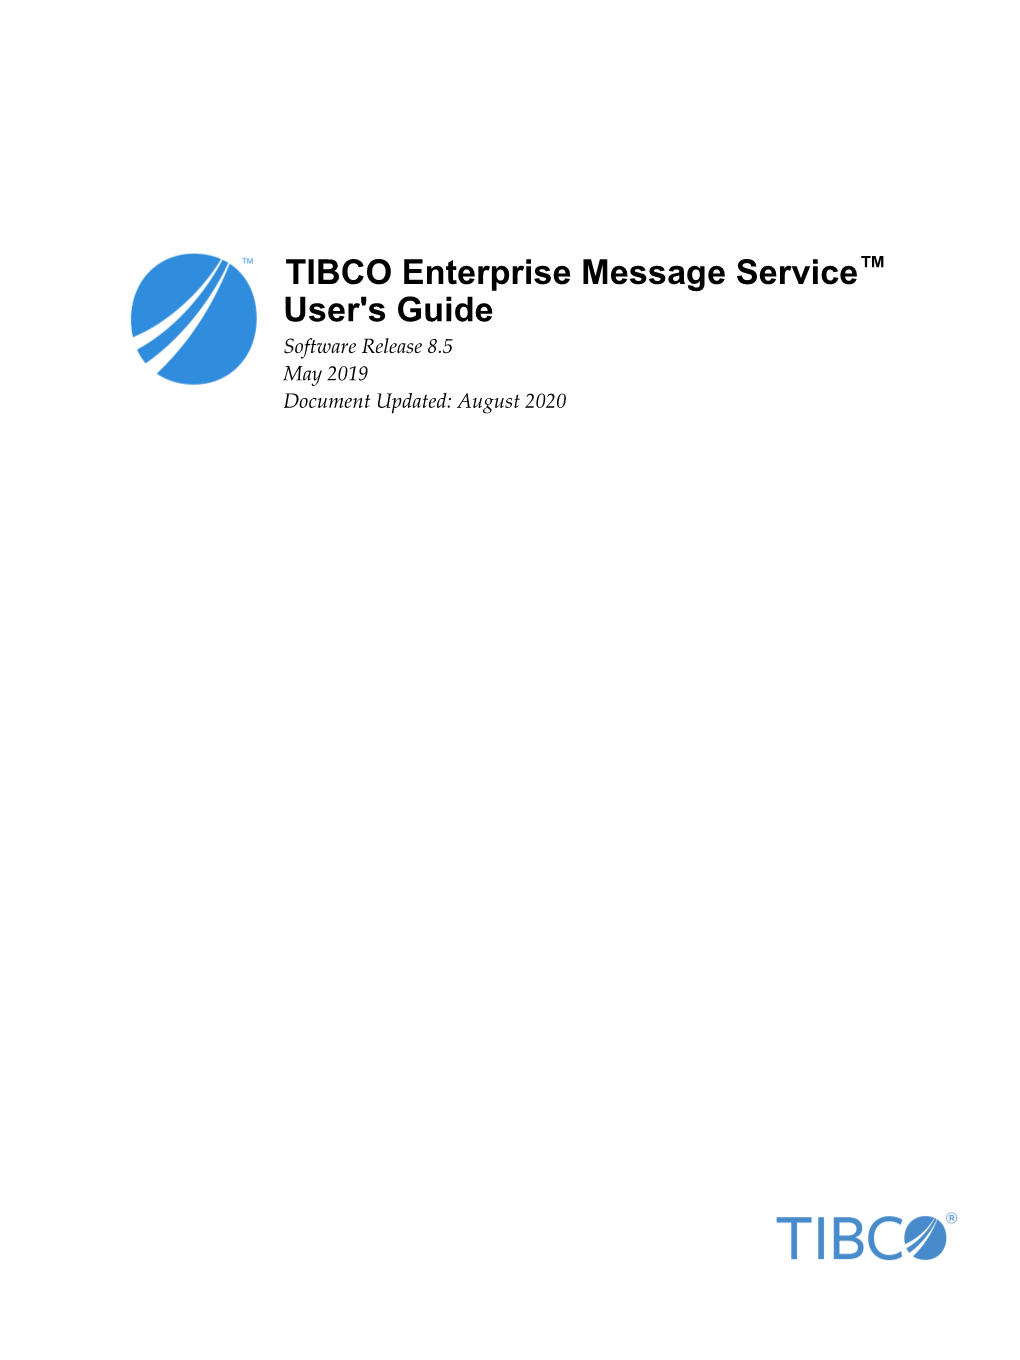 TIBCO Enterprise Message Service™ User's Guide Software Release 8.5 May 2019 Document Updated: August 2020 2